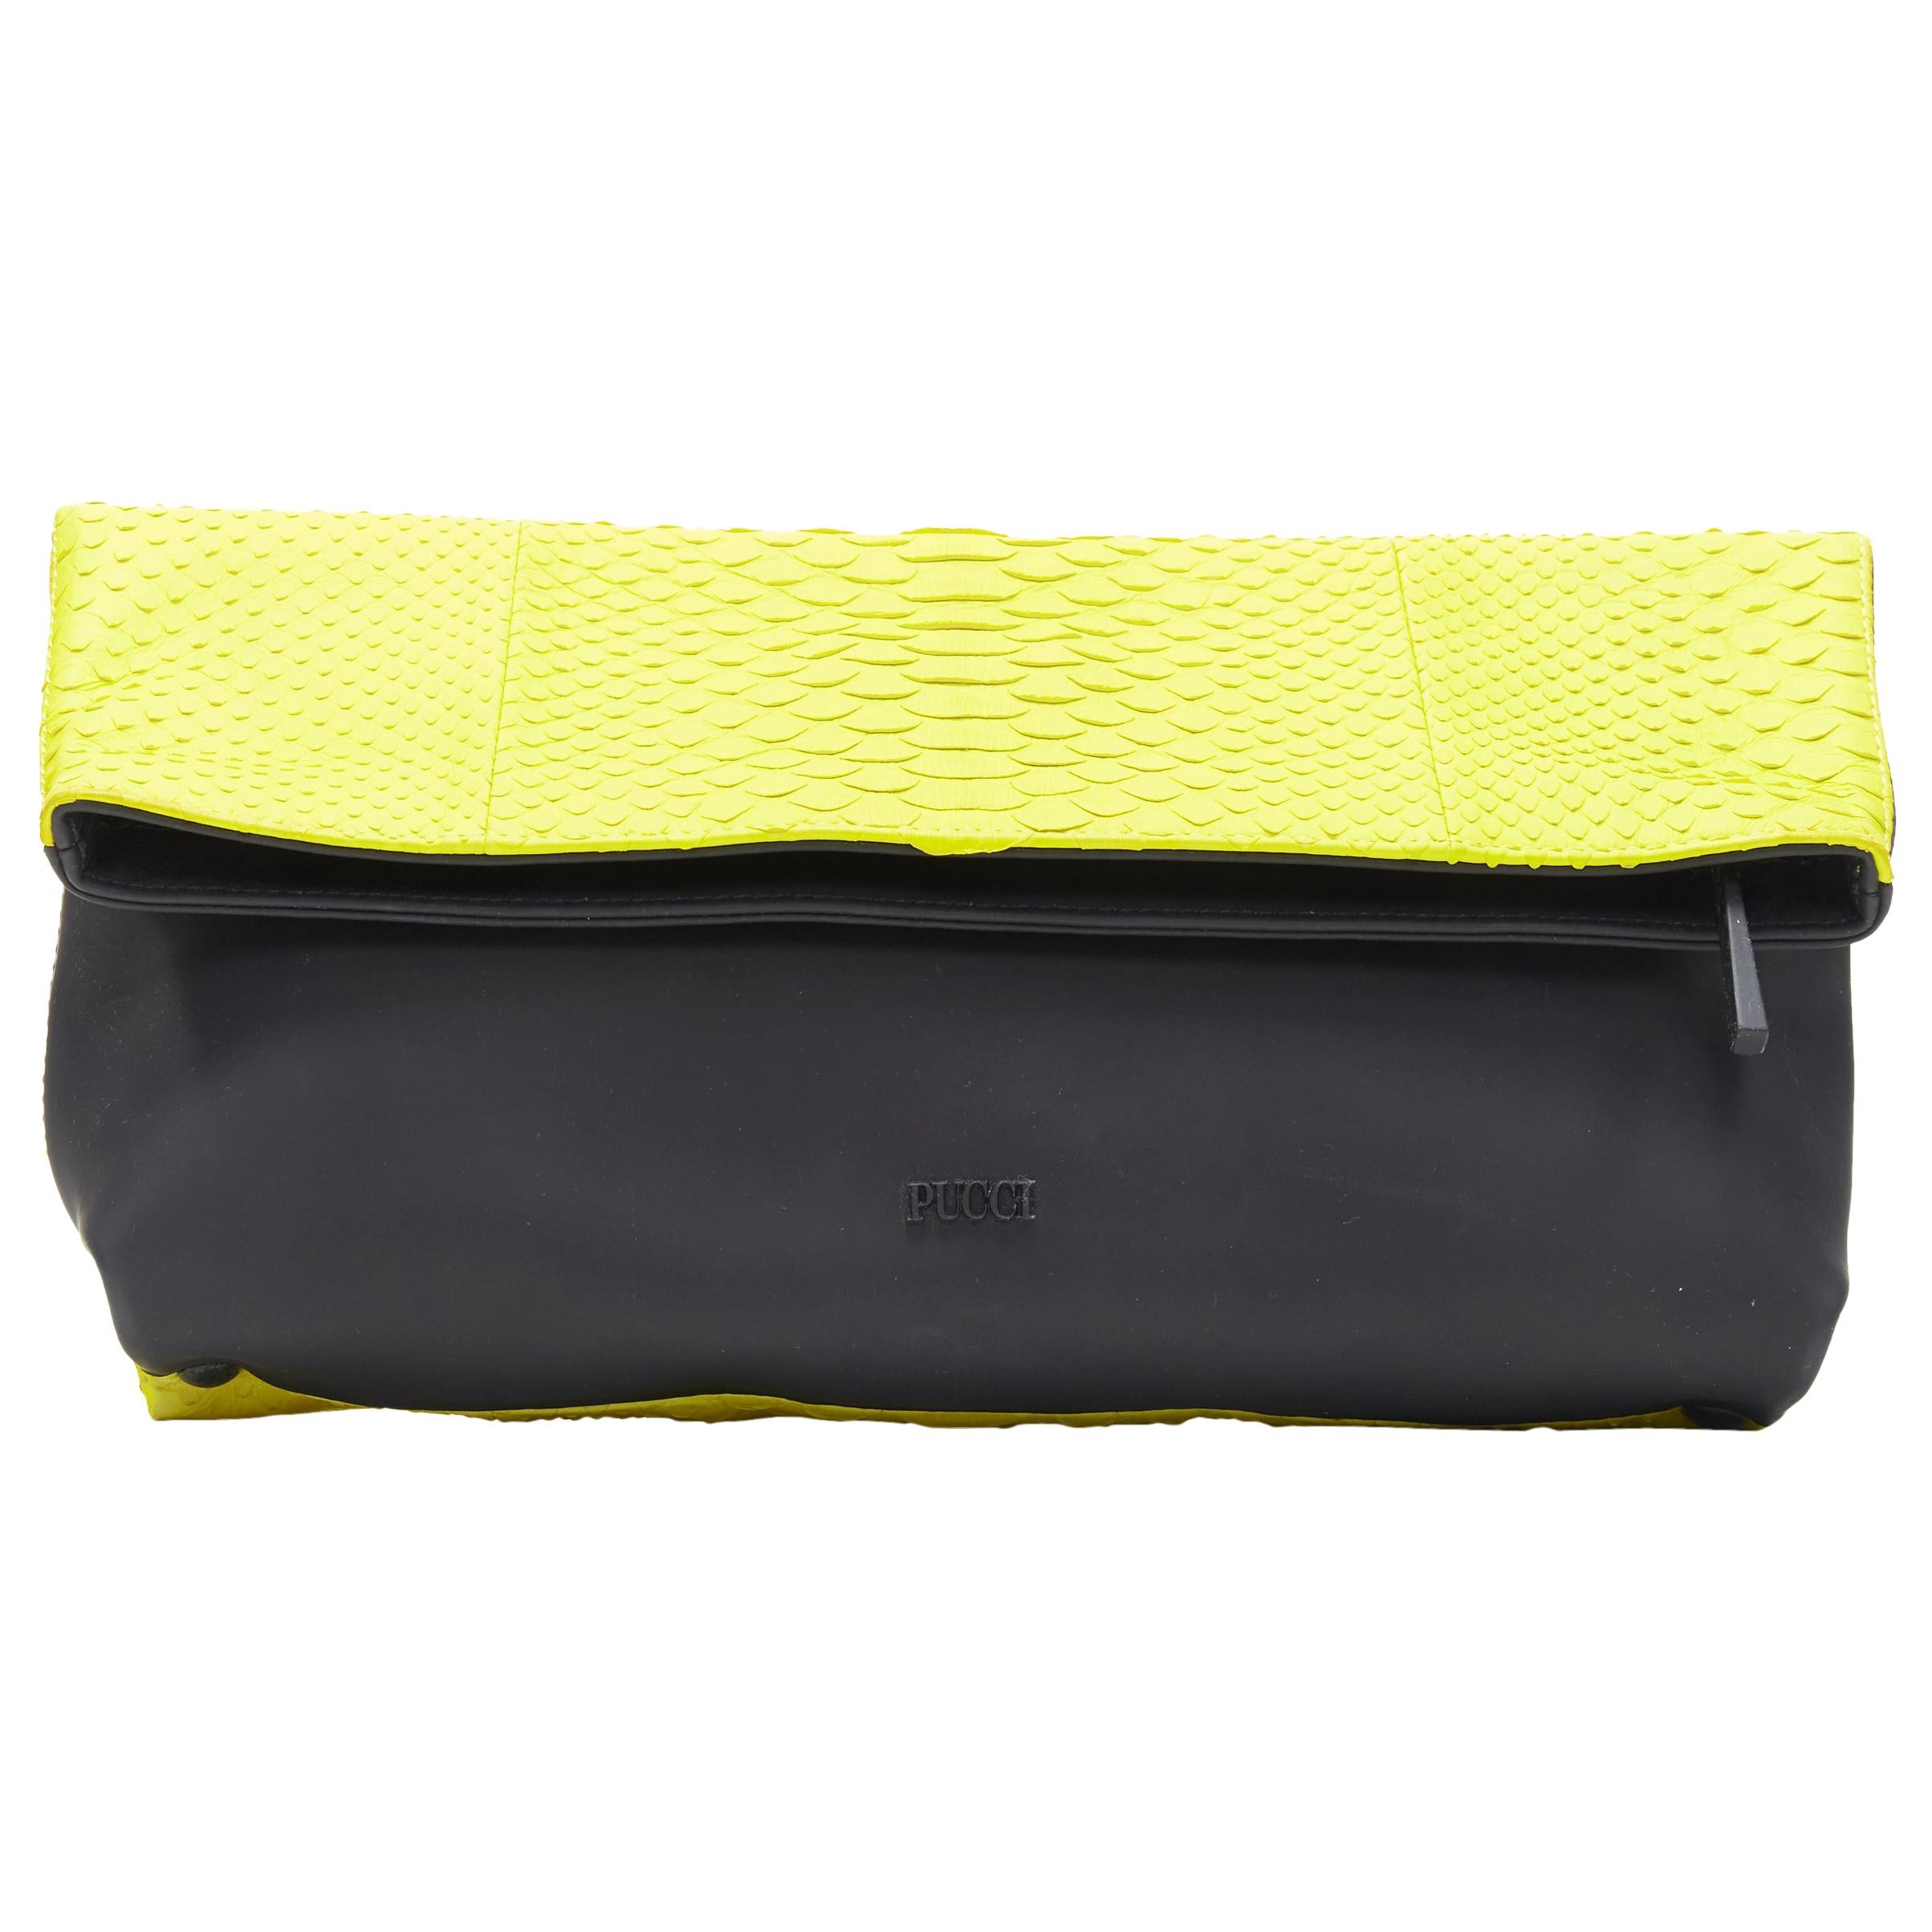 EMILIO PUCCI neon yellow scaled pleather black rubber fold over clutch bag